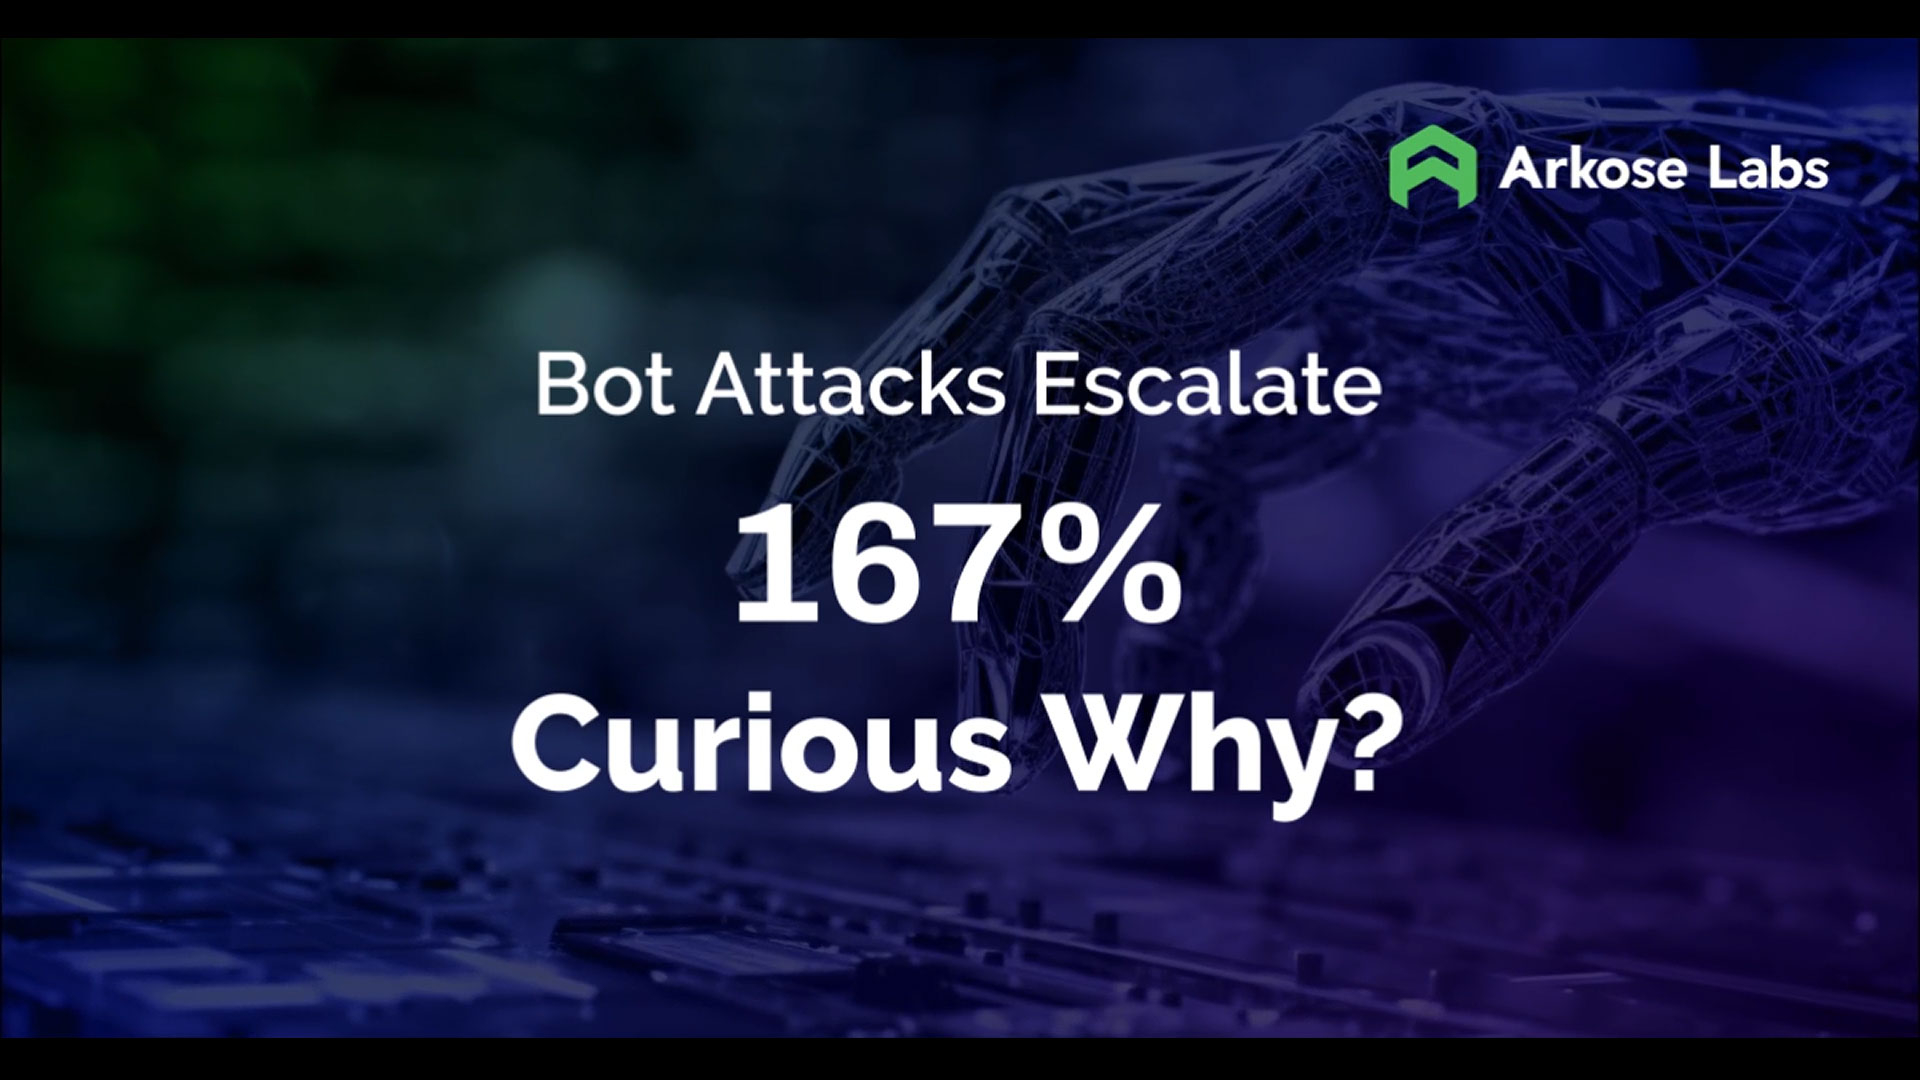 Find out why bot attacks are escalating